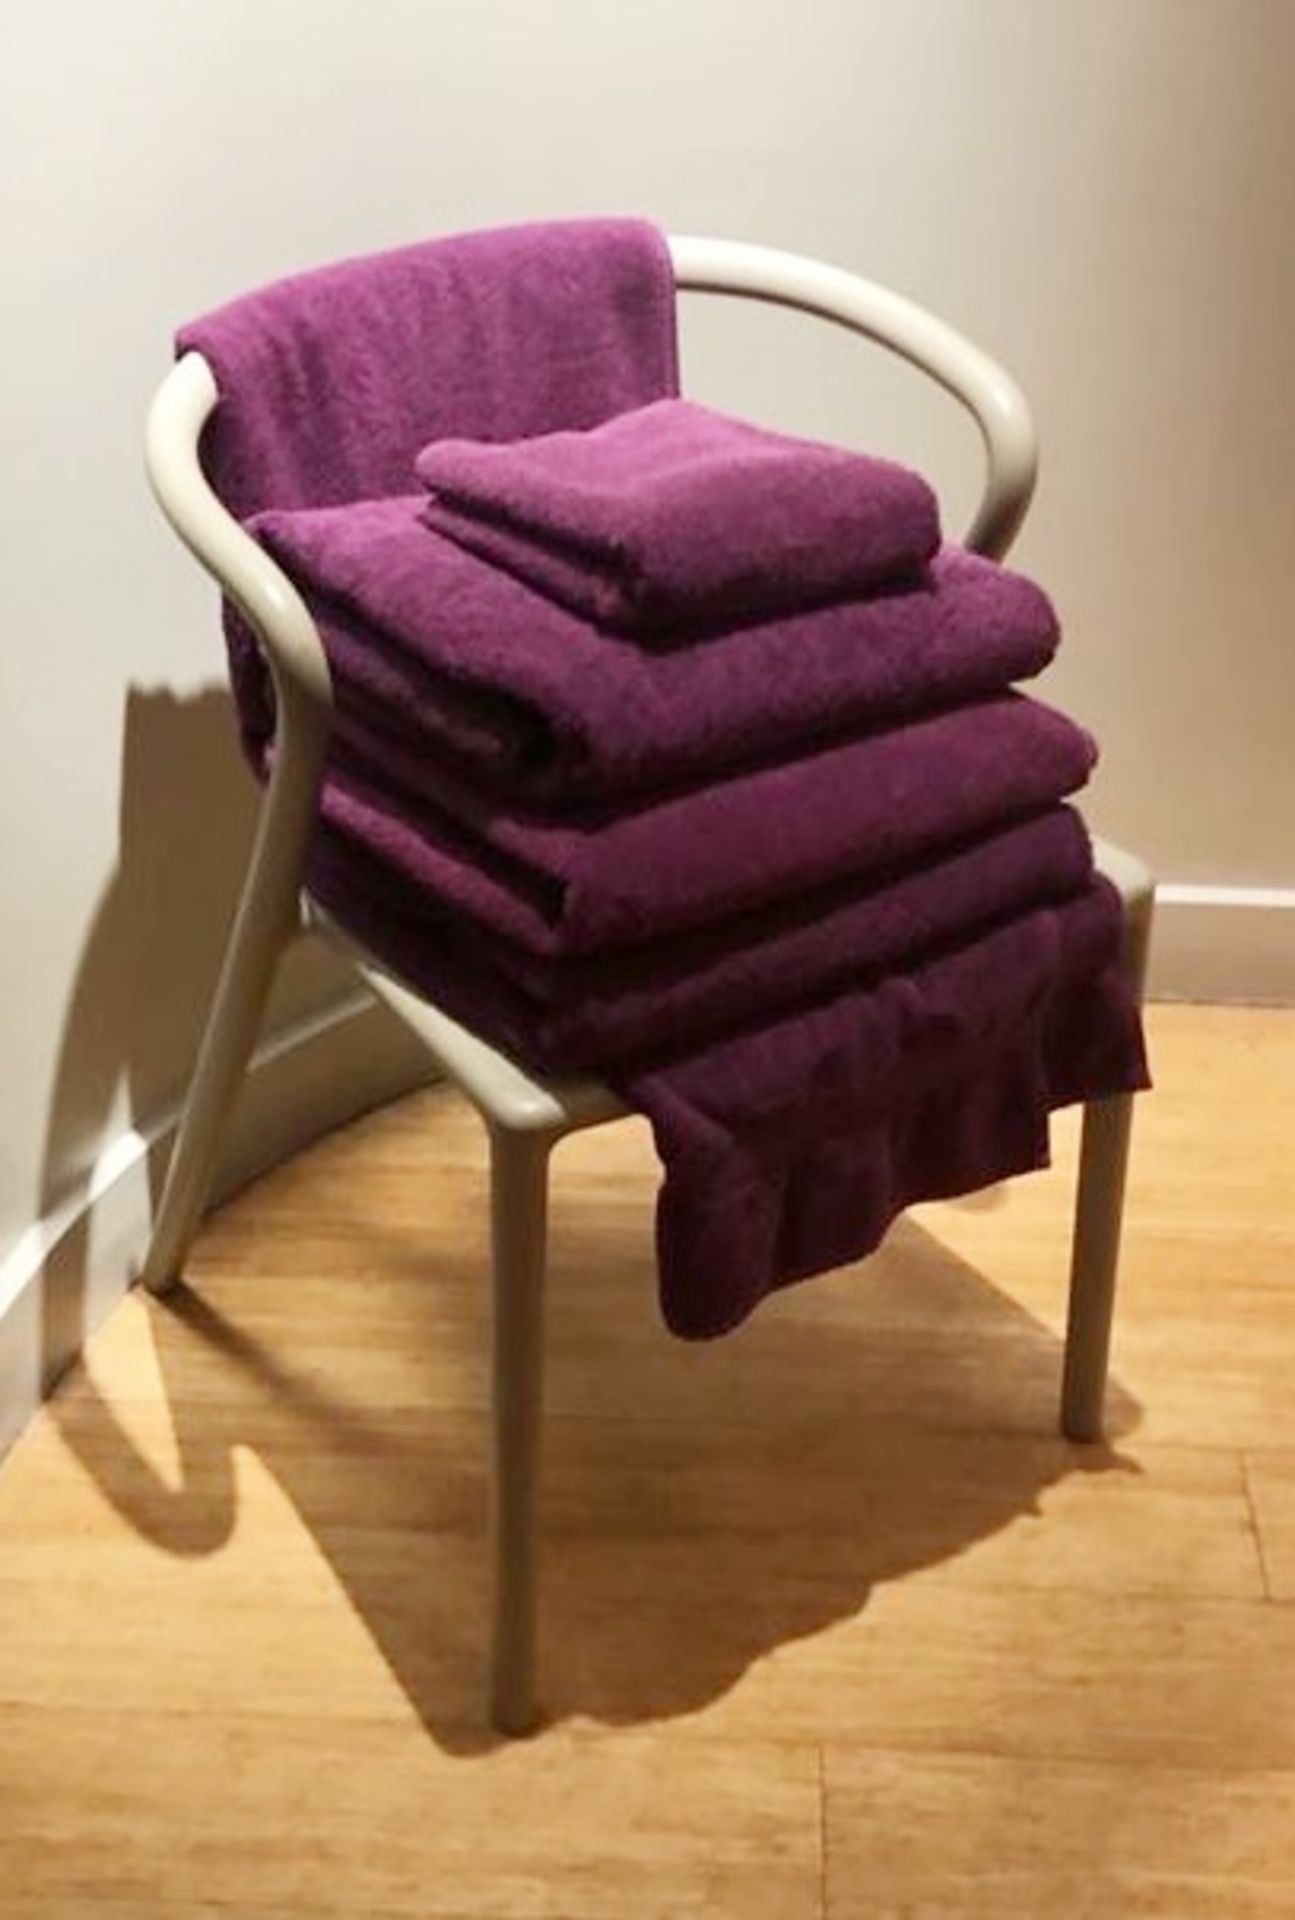 20 x Majestic Luxury 620gsm Bath Towels in Purple - Size LARGE - RRP £340 - CL587 - Location: Altrin - Image 3 of 5